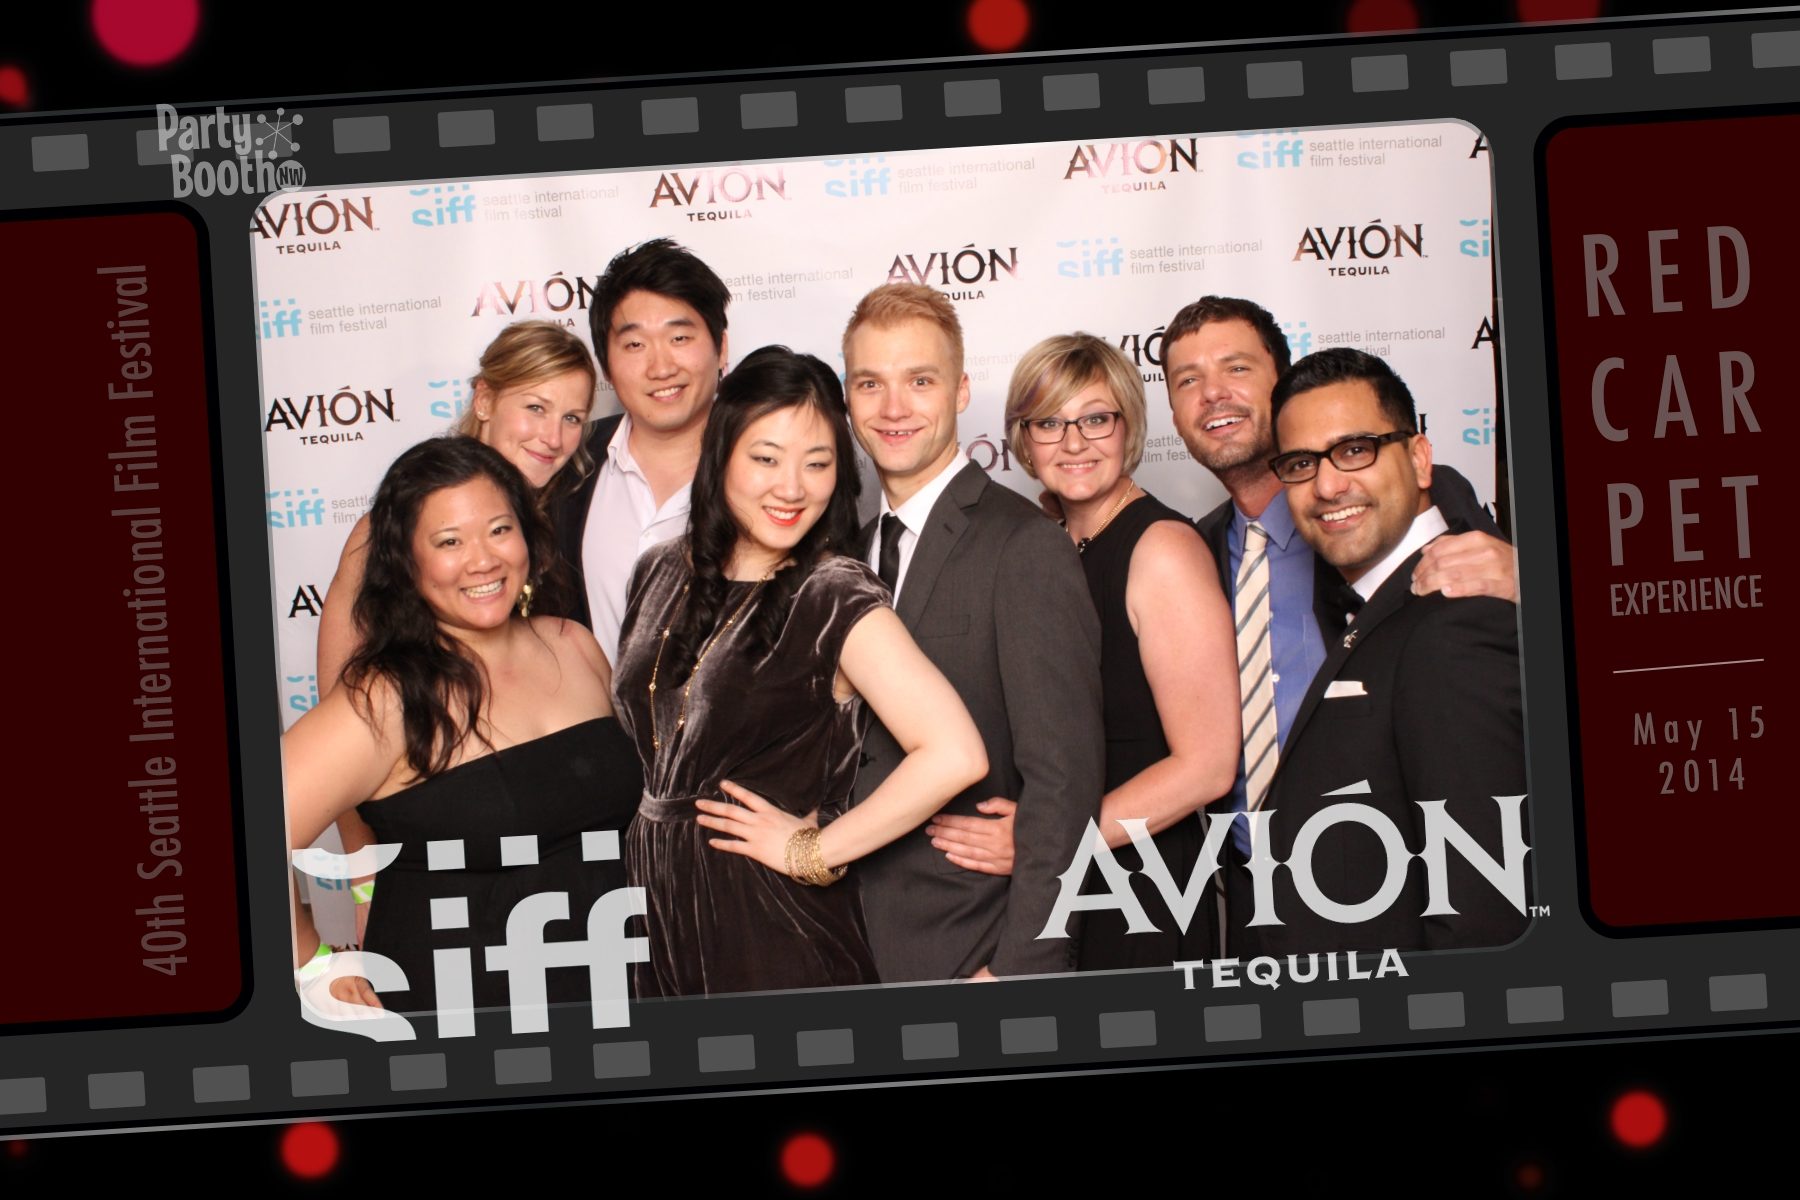 Walk down the Red Carpet with Avion Tequila for the Seattle International Film Festival Opening Night Gala - Tonight We PartyBooth! Seattle Photo Booth © 2014 PartyBoothNW.com